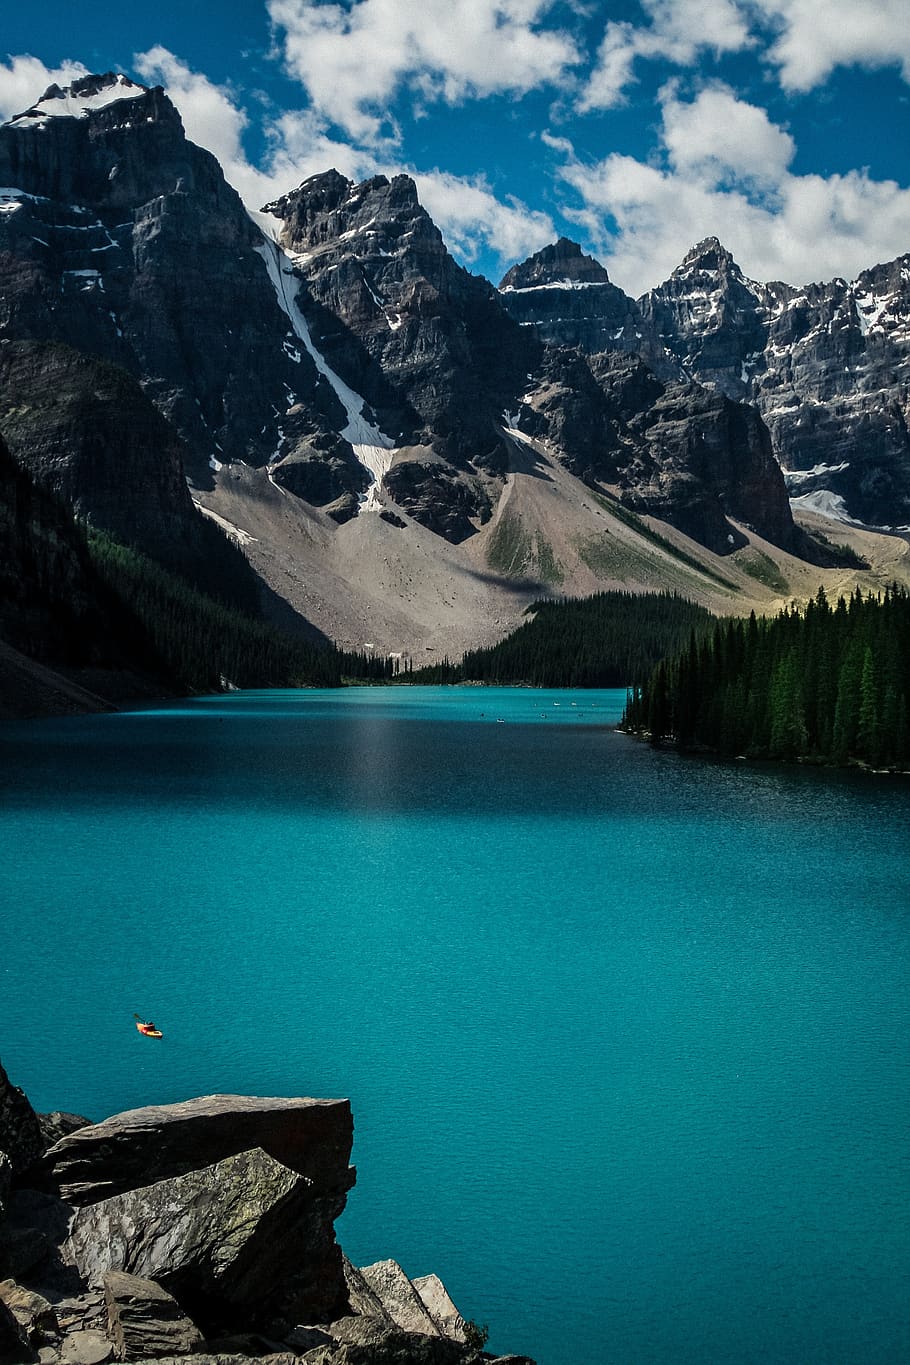 Turquoise lake with snow-capped mountains in the background - Lake